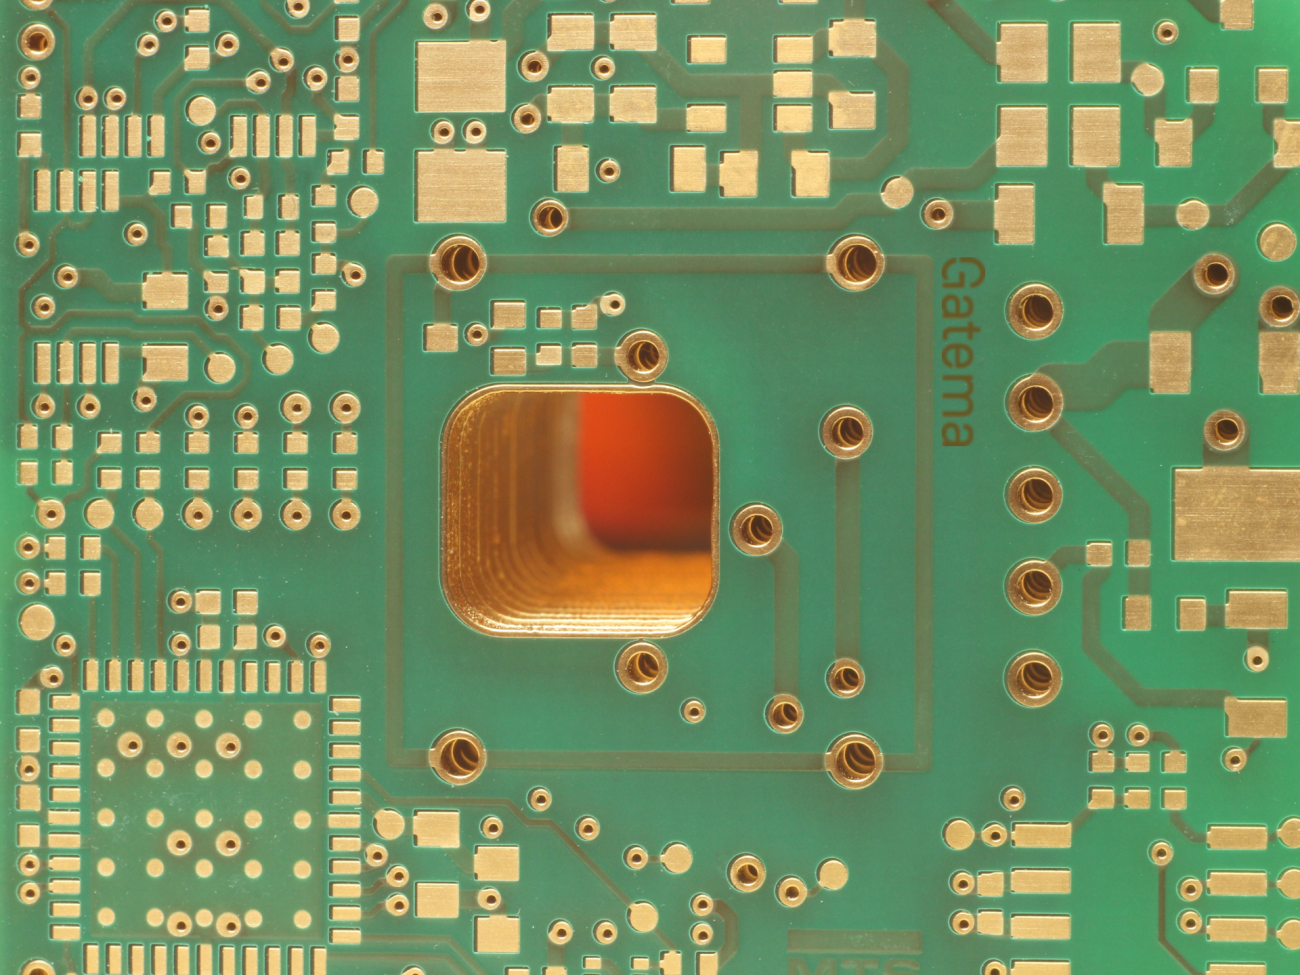 Microvias in printed circuit boards